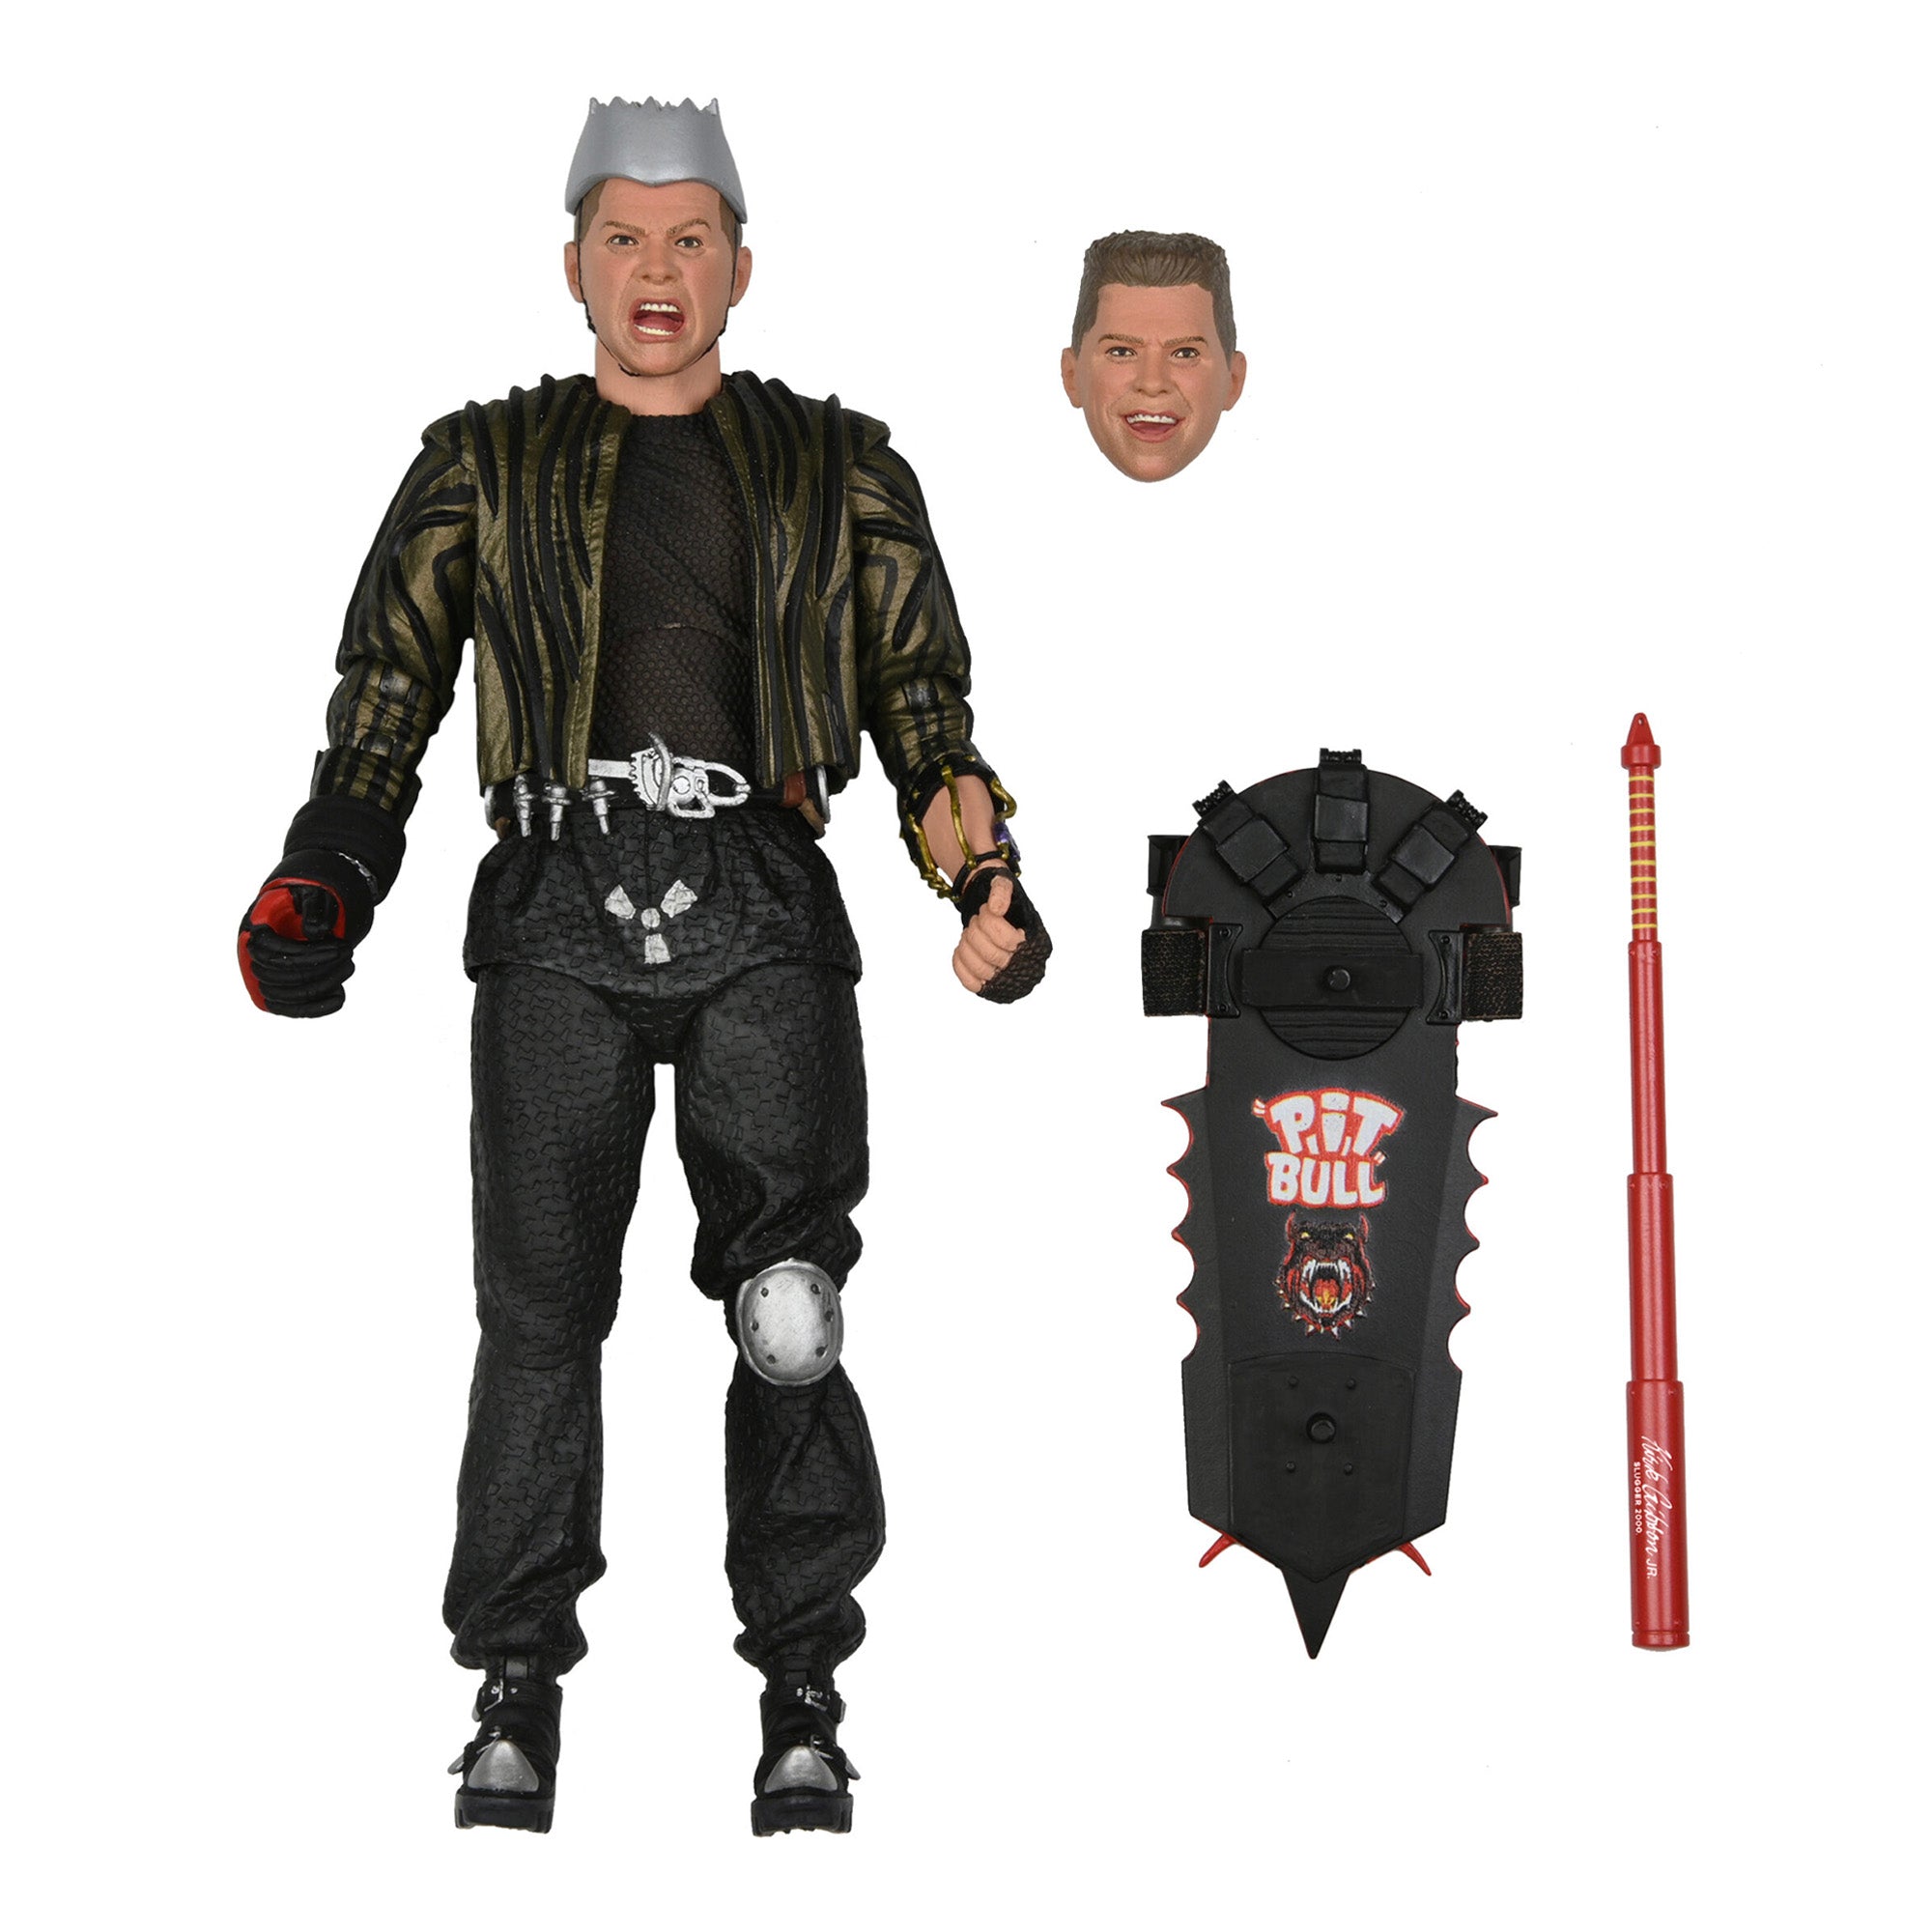 NECA: Back to the Future Part II - Ultimate Griff 7